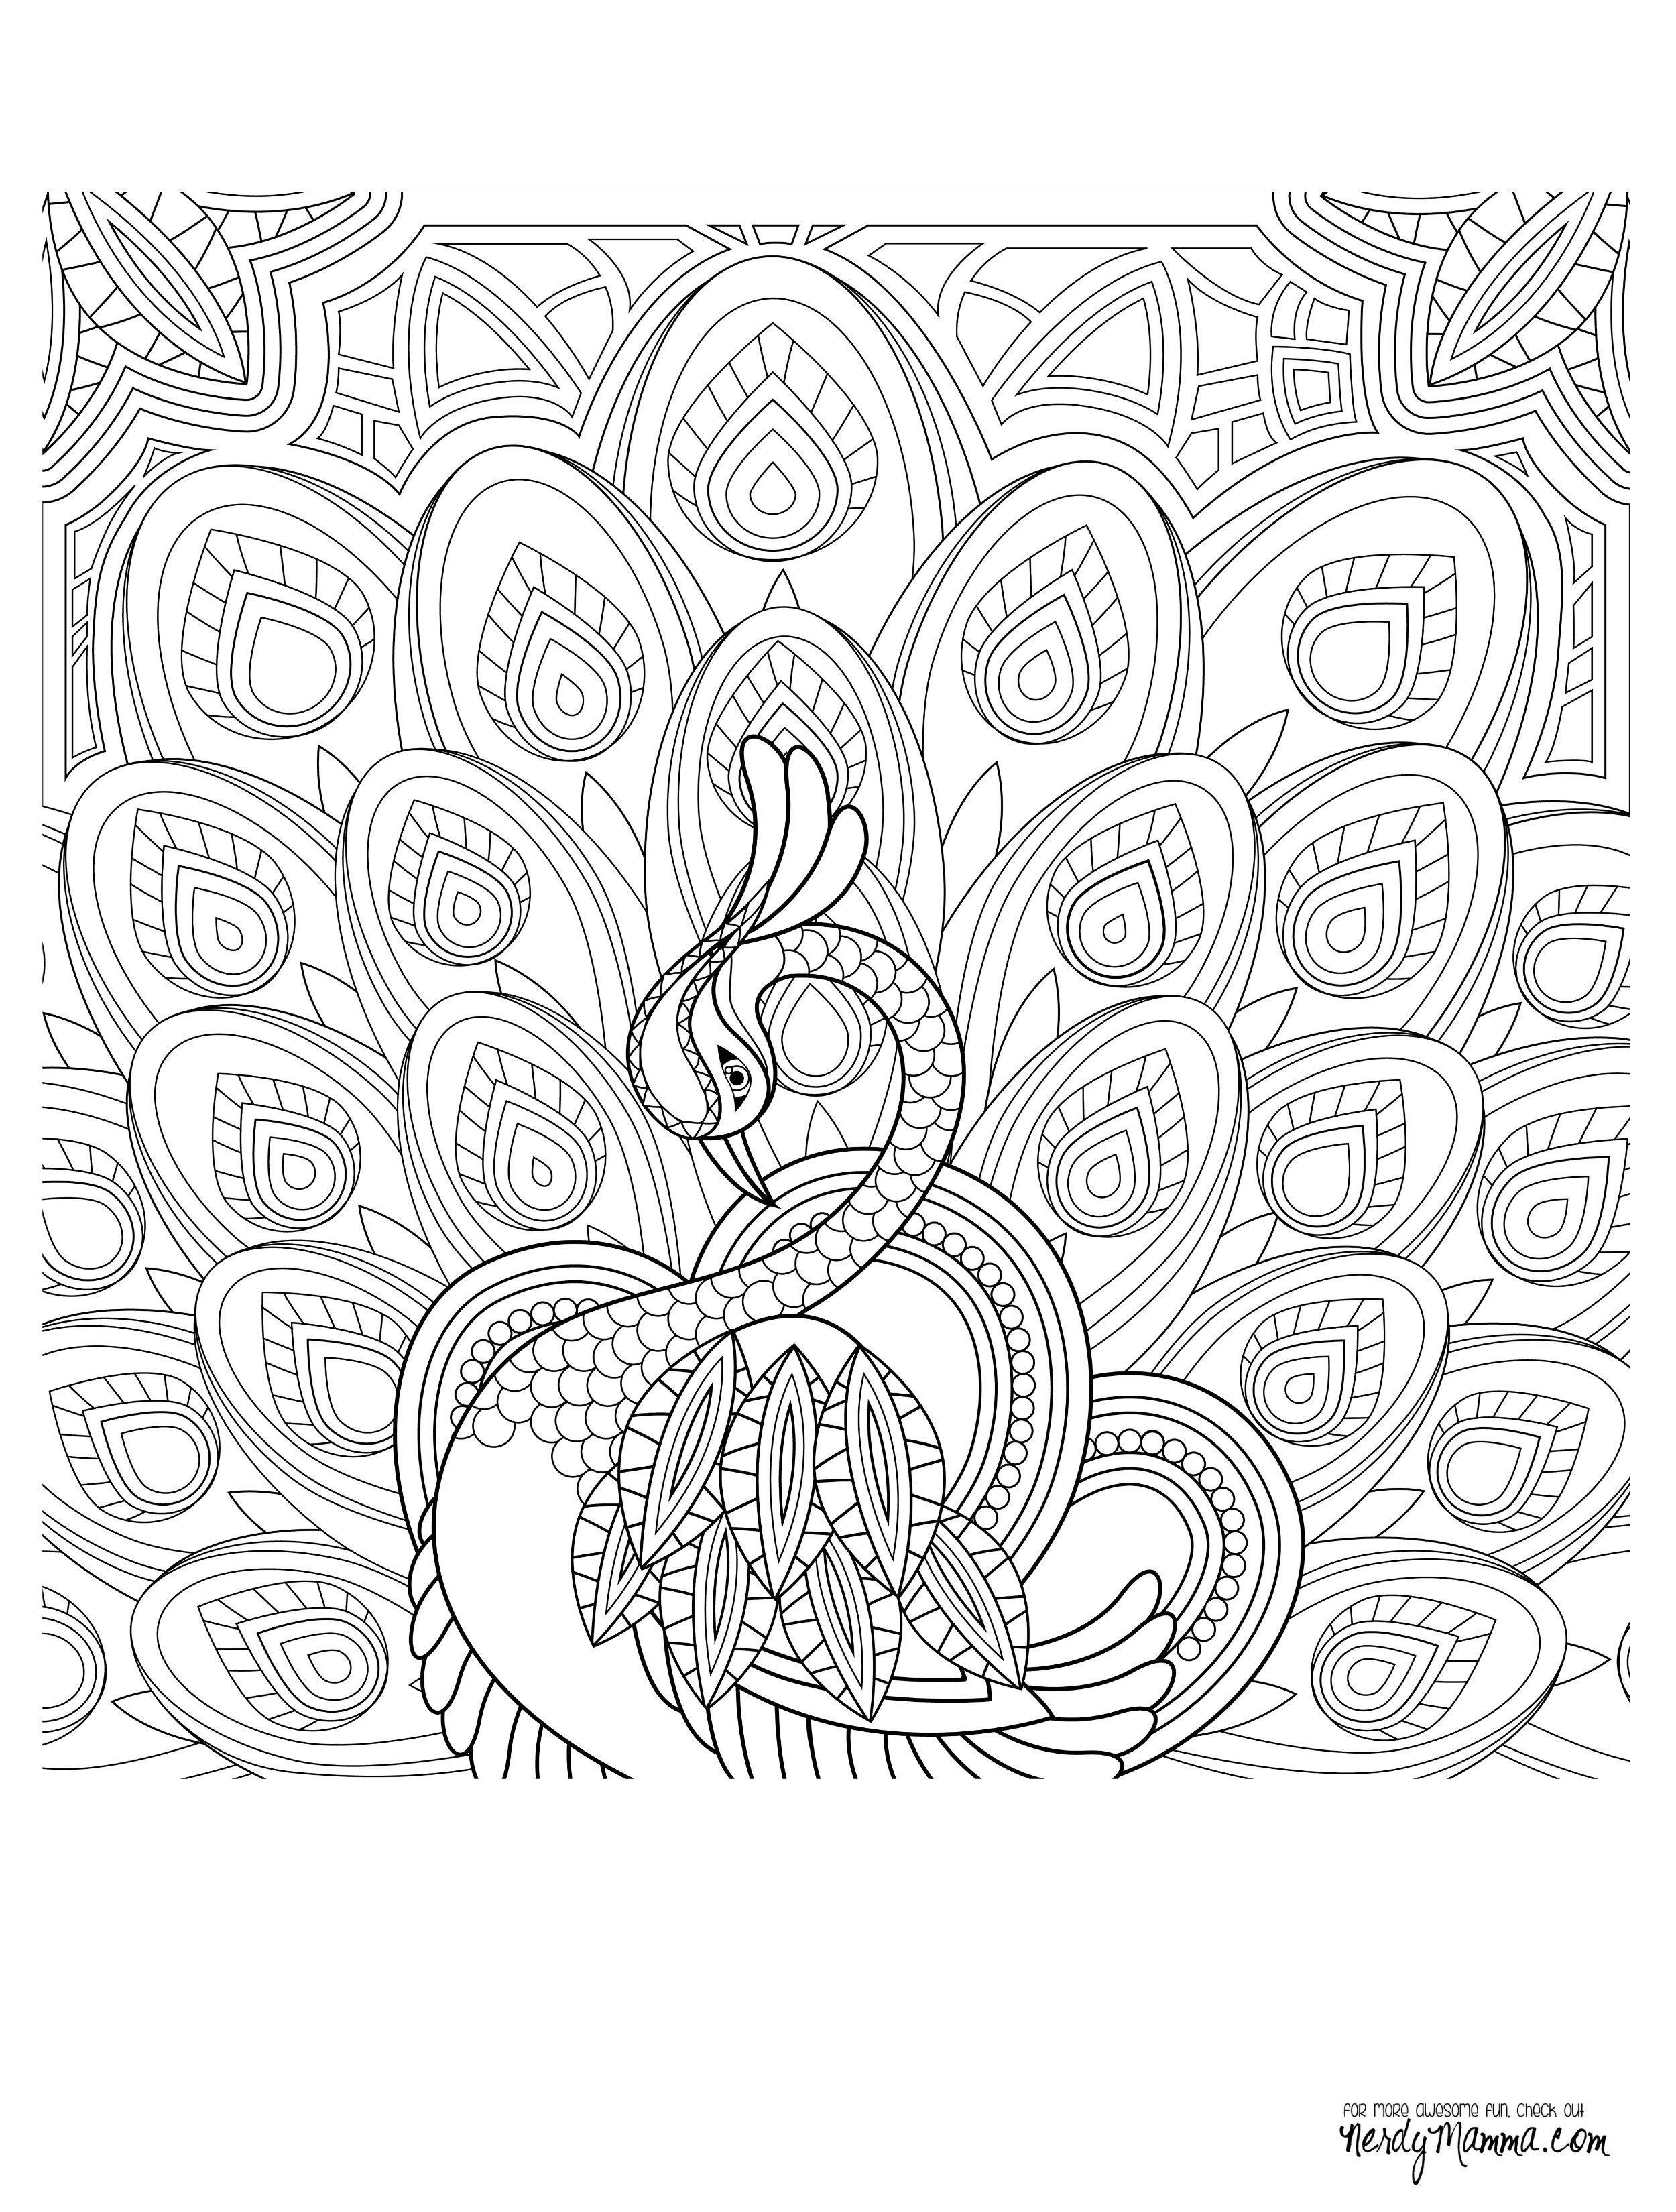 butterfly Coloring Page Wallpaper